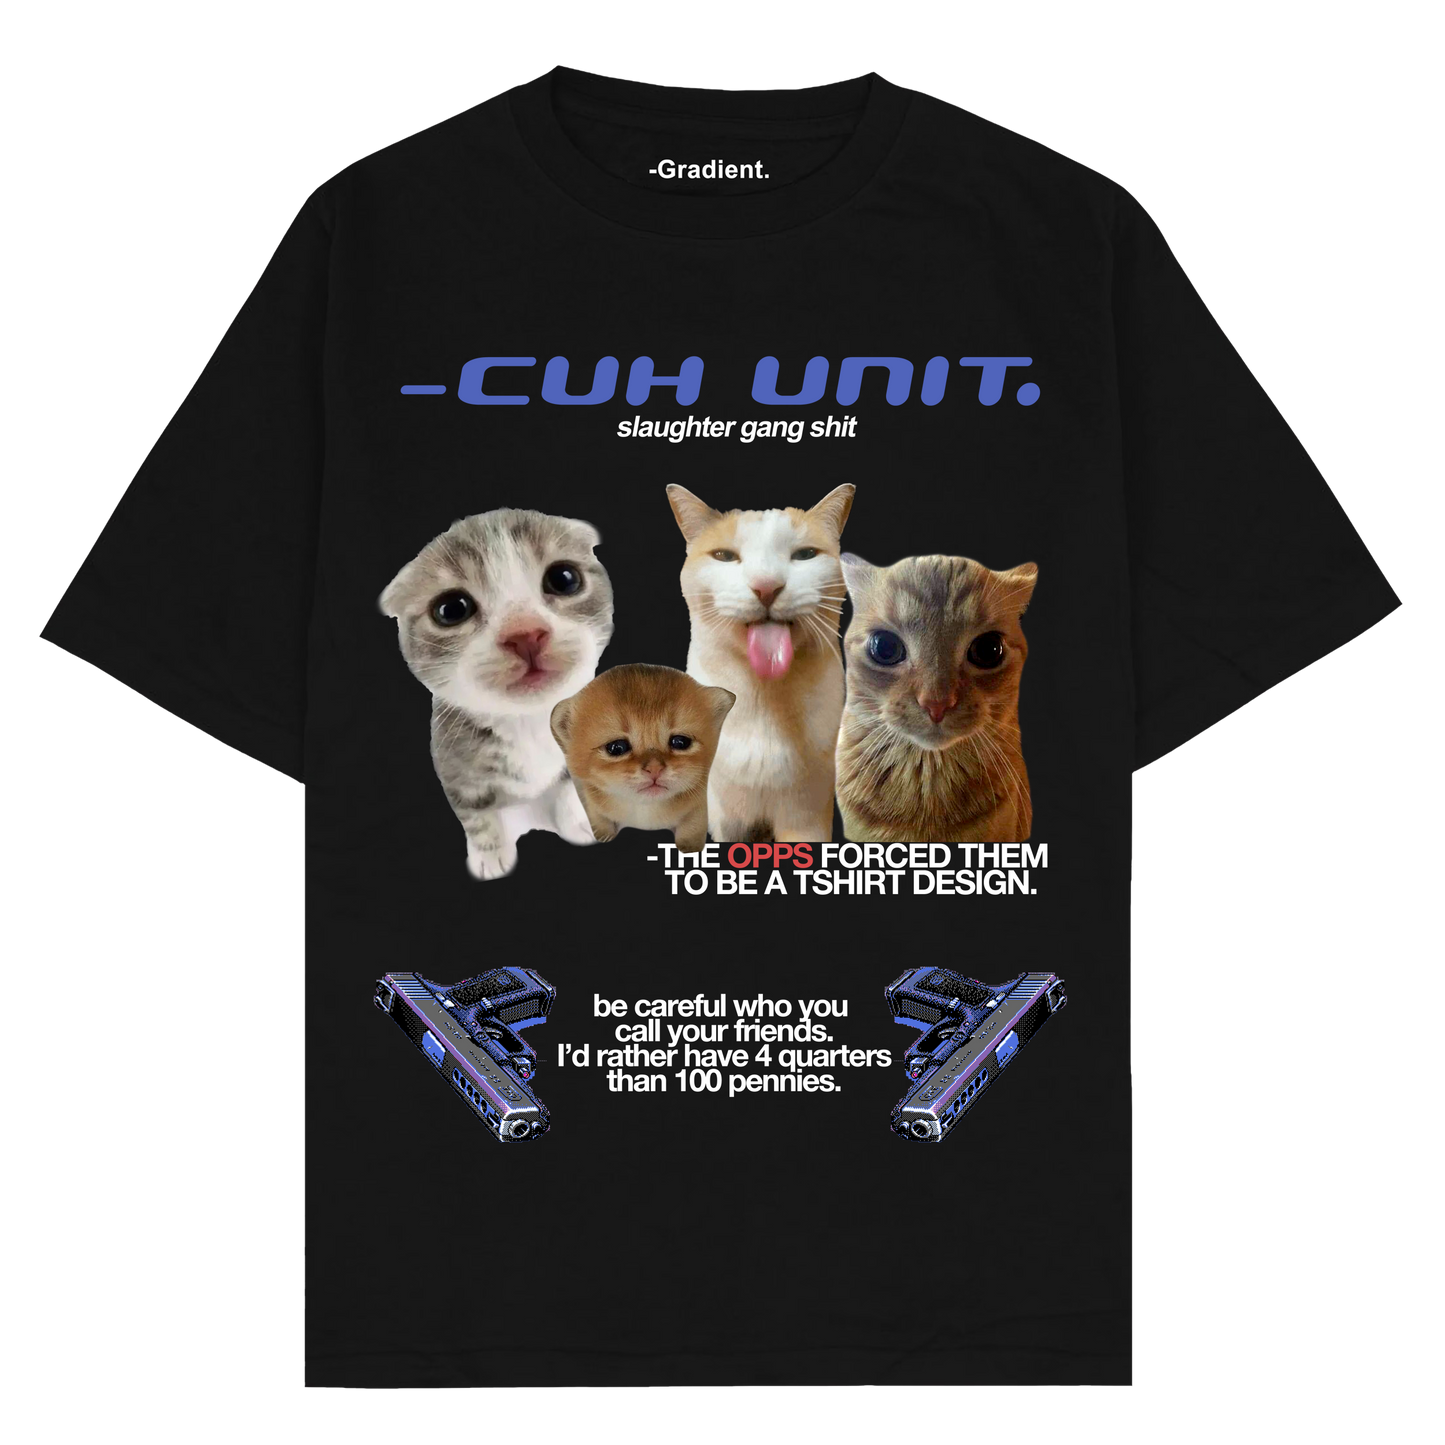 Cuh Unit "Silly Goofy Cats" - Oversized T-Shirt